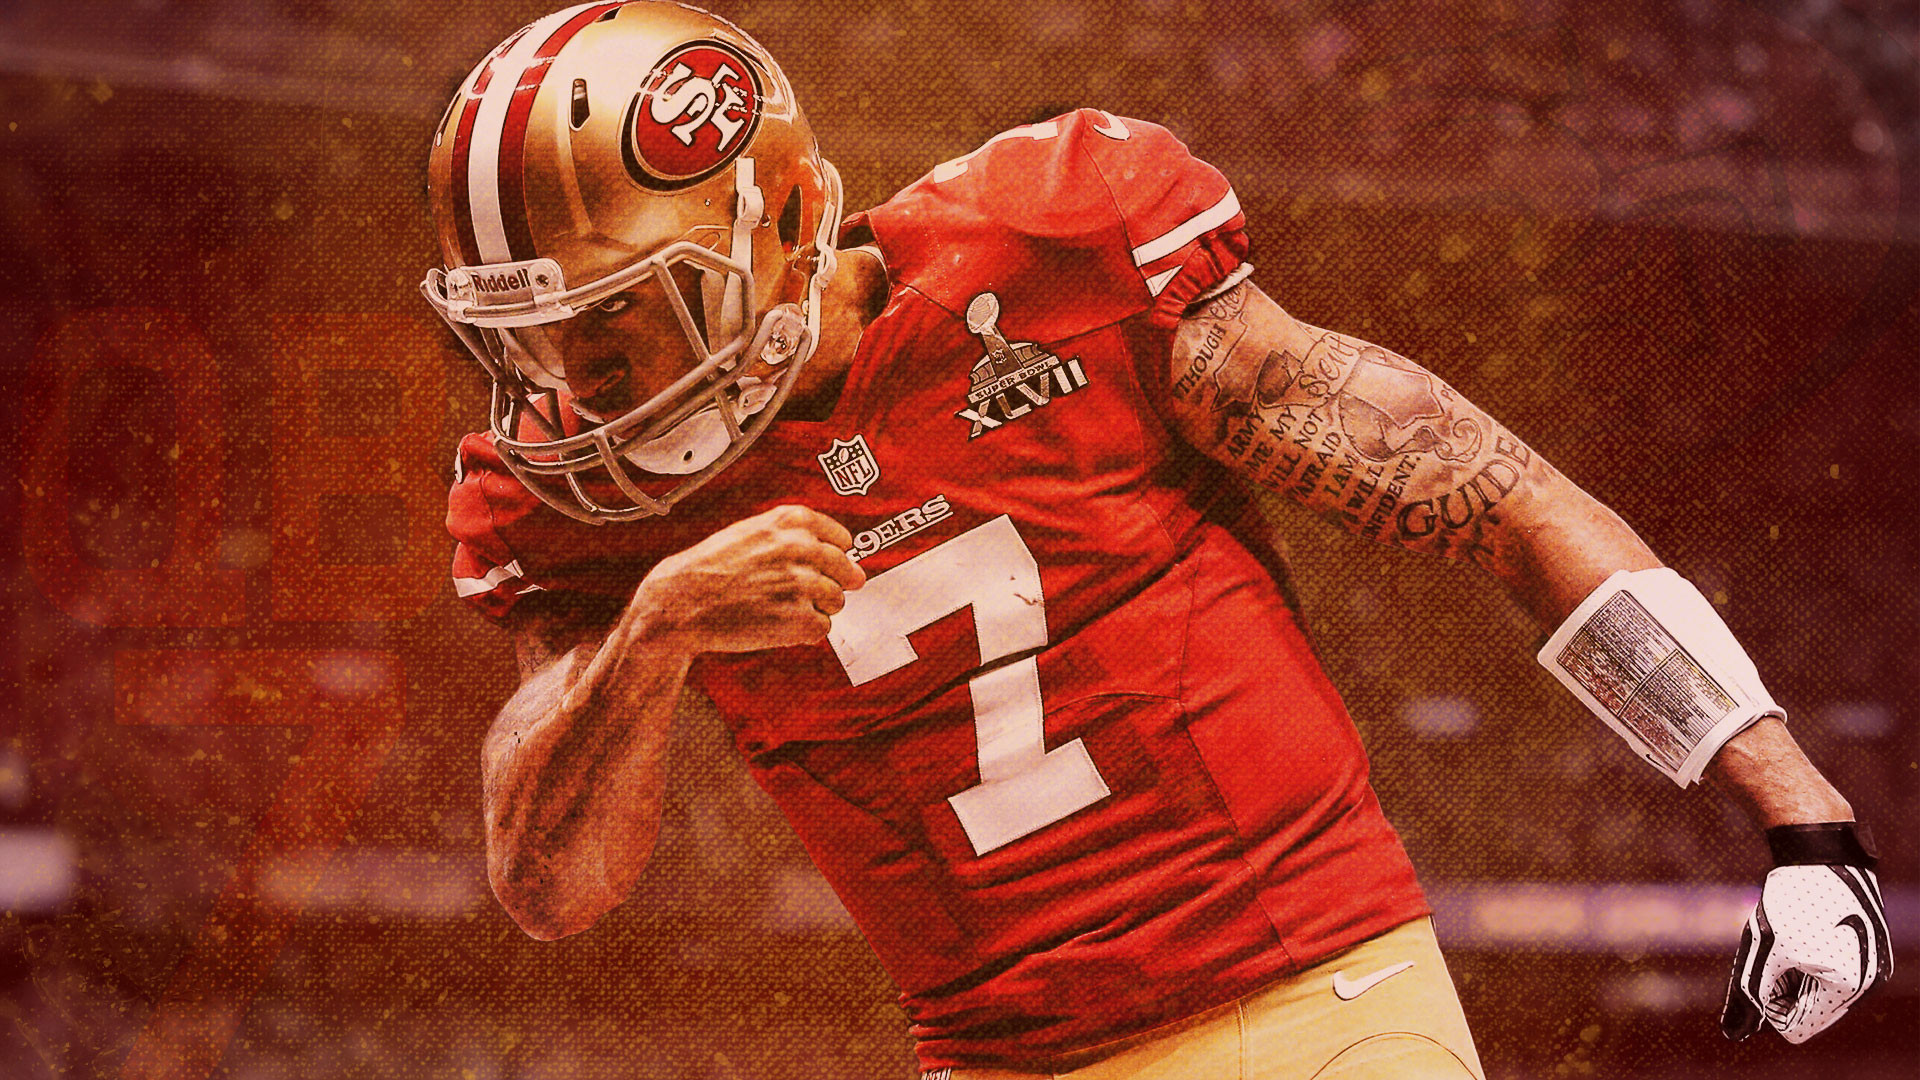 1920x1080 Hey /r/49ers! I made you guys a Colin Kaepernick wallpaper. I hope you guys  enjoy! Best of luck this season from a Pats fan!